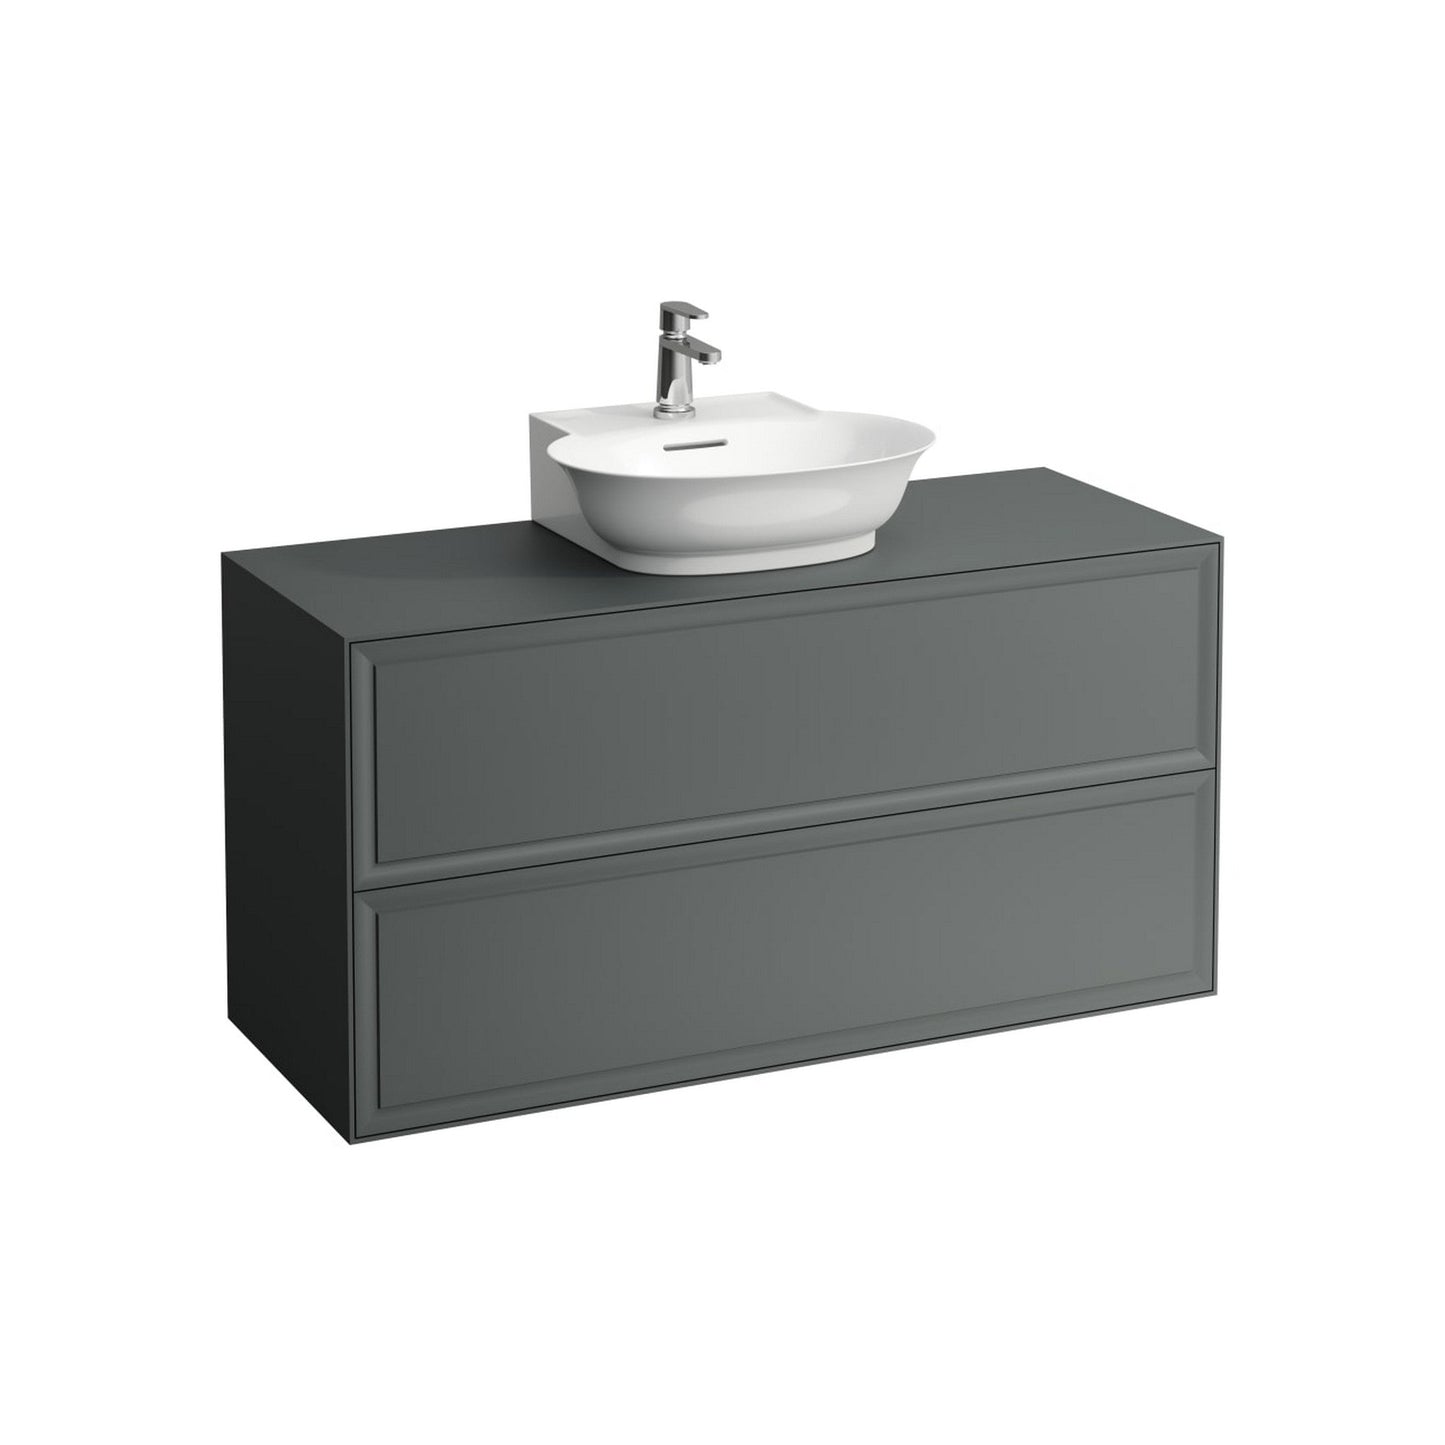 Laufen New Classic 46" 2-Drawer Traffic Gray Wall-Mounted Vanity for New Classic Bathroom Sink Model: H816852